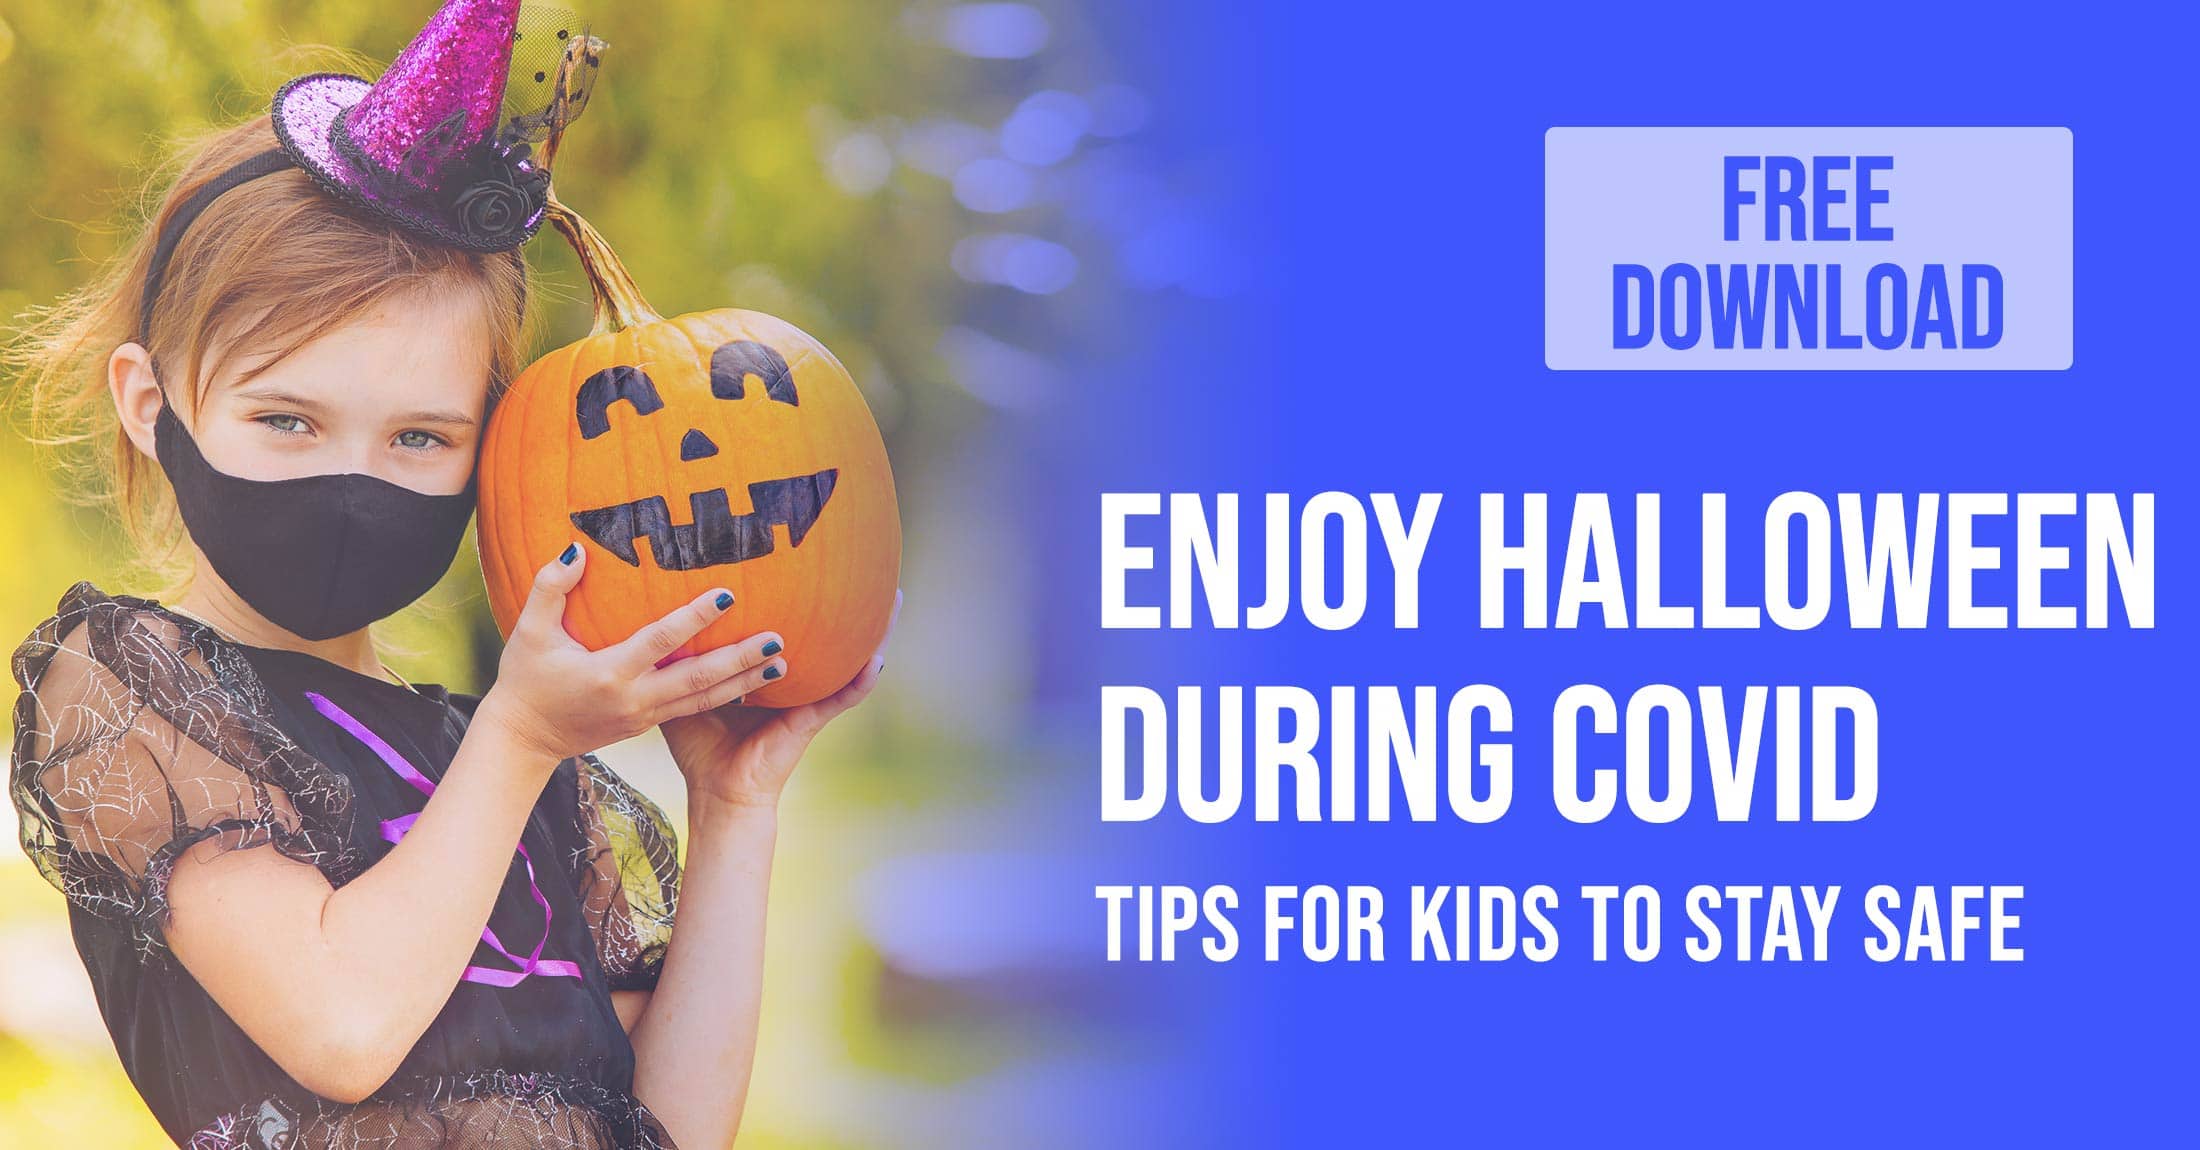 HALLOWEEN SAFETY DURING COVID